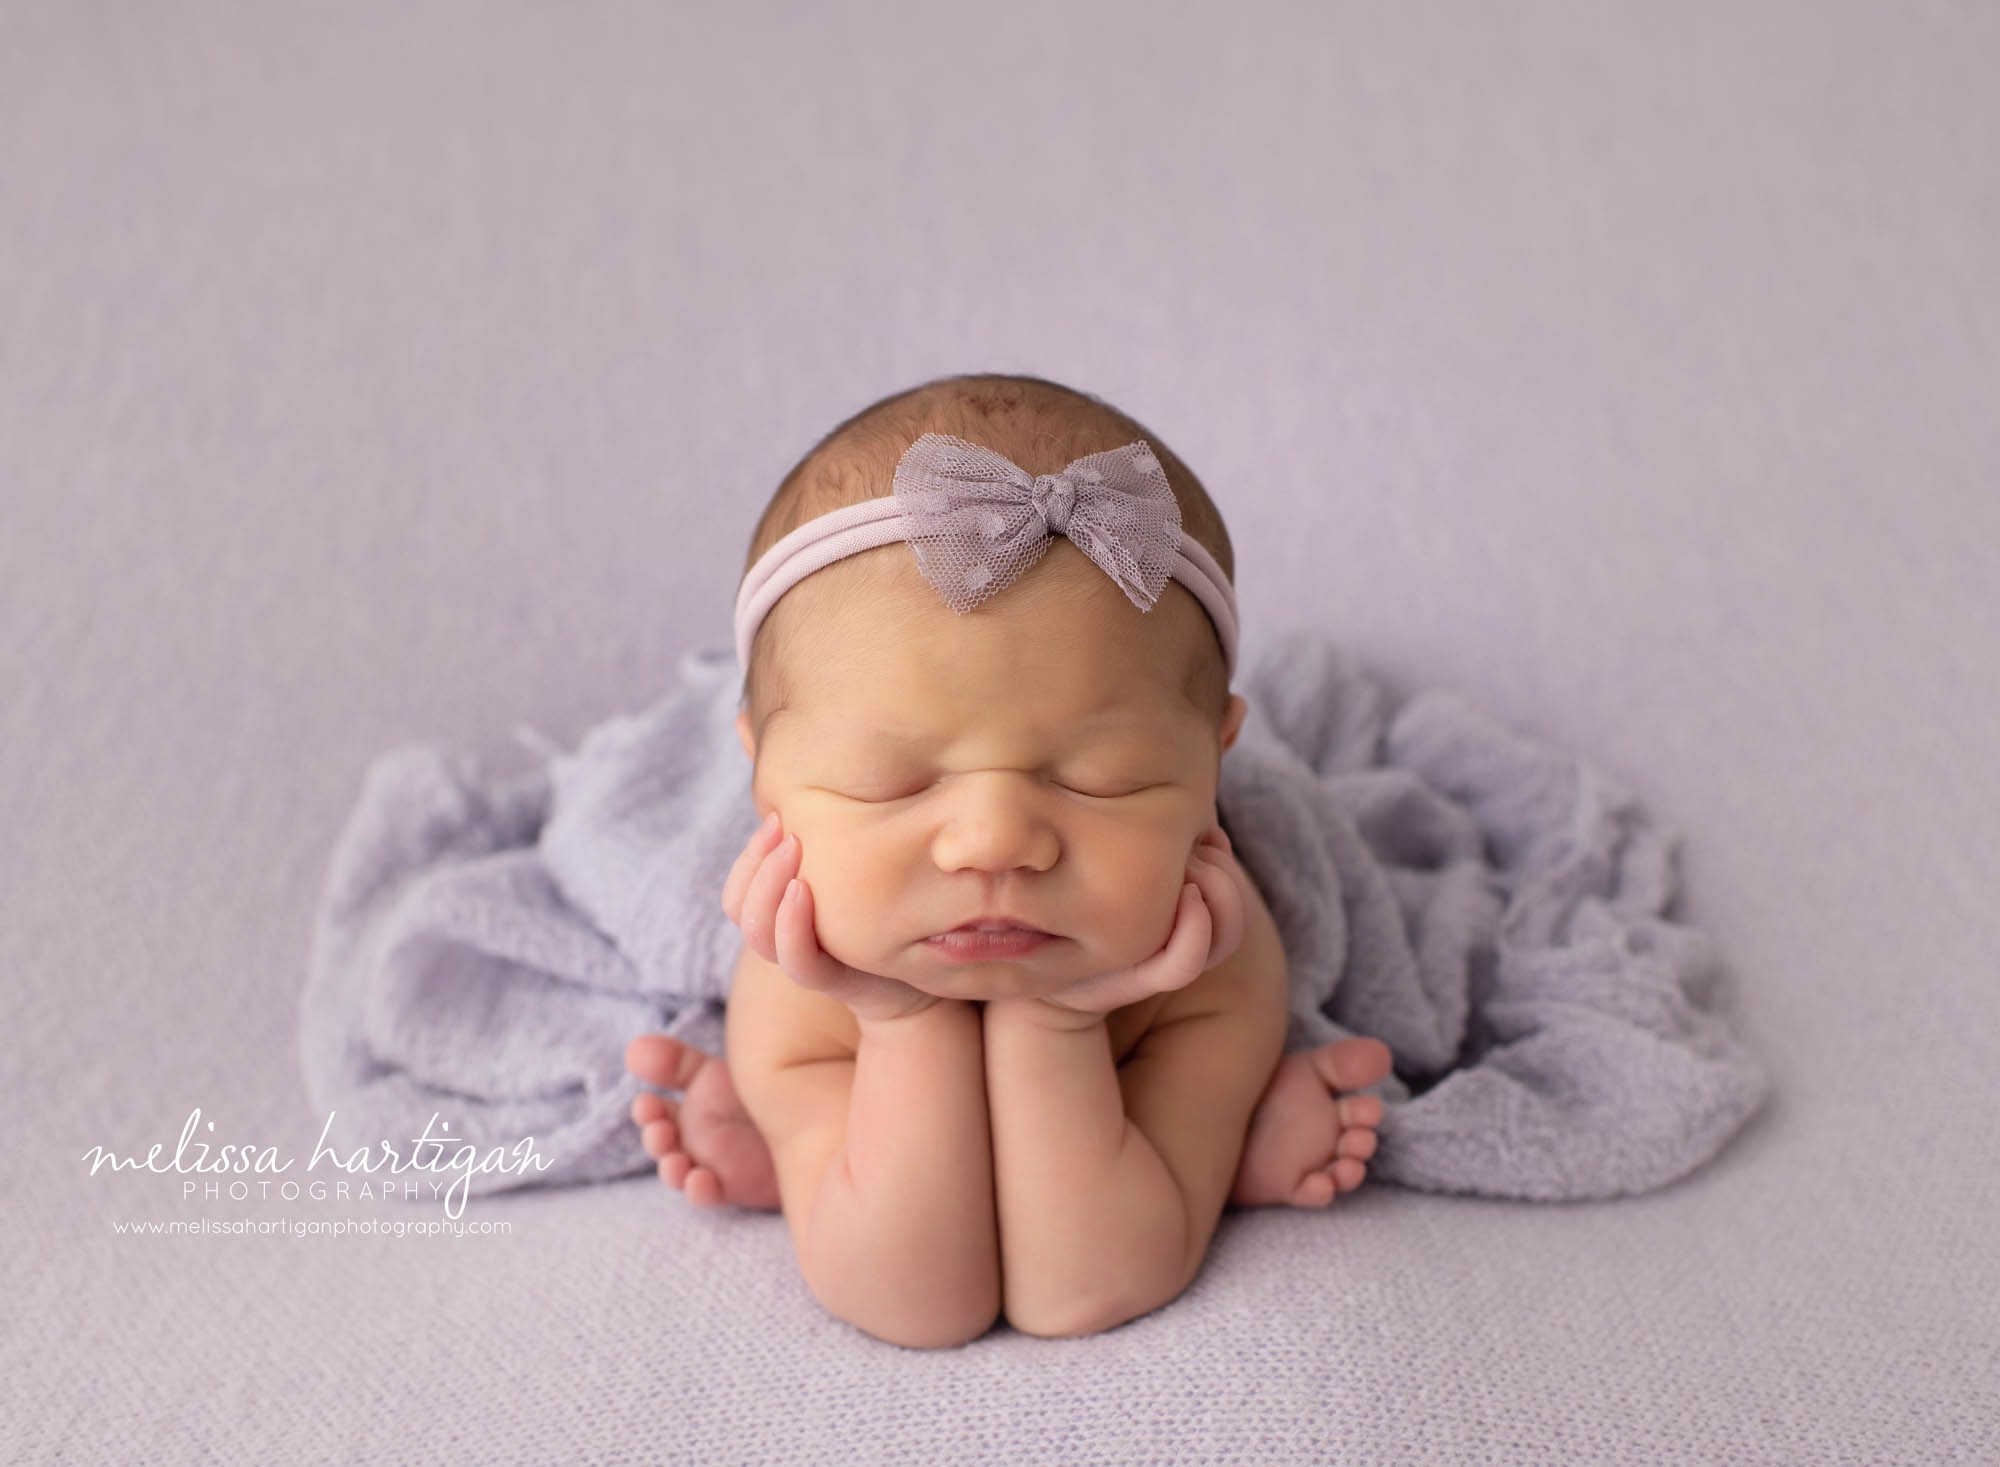 Baby girl posed in froggy pose on purple backdrop with purple bow headband